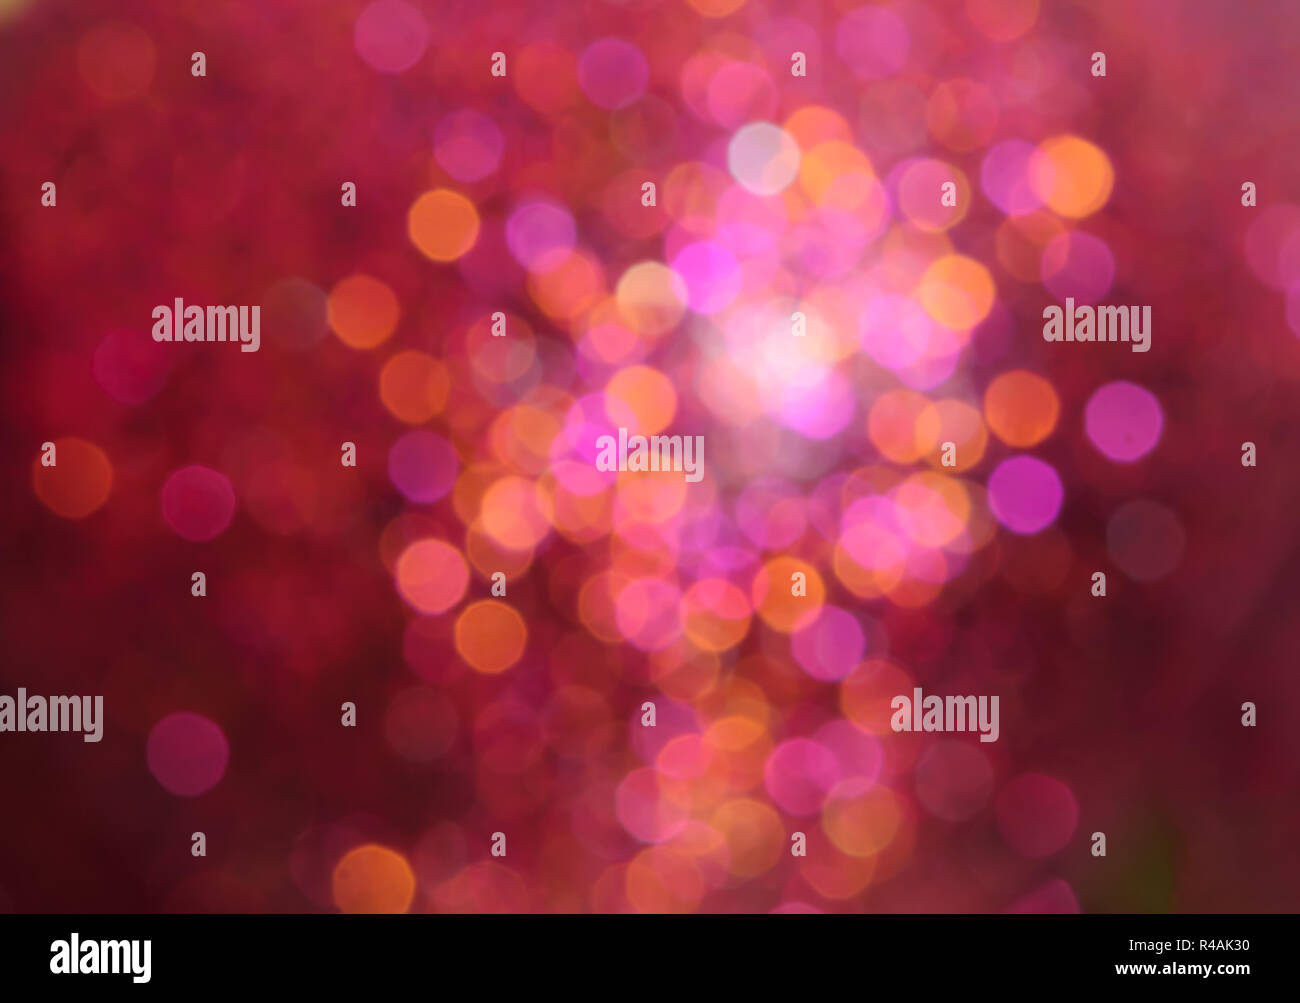 Defocused abstract multicolored bokeh christmas lights background. Stock Photo